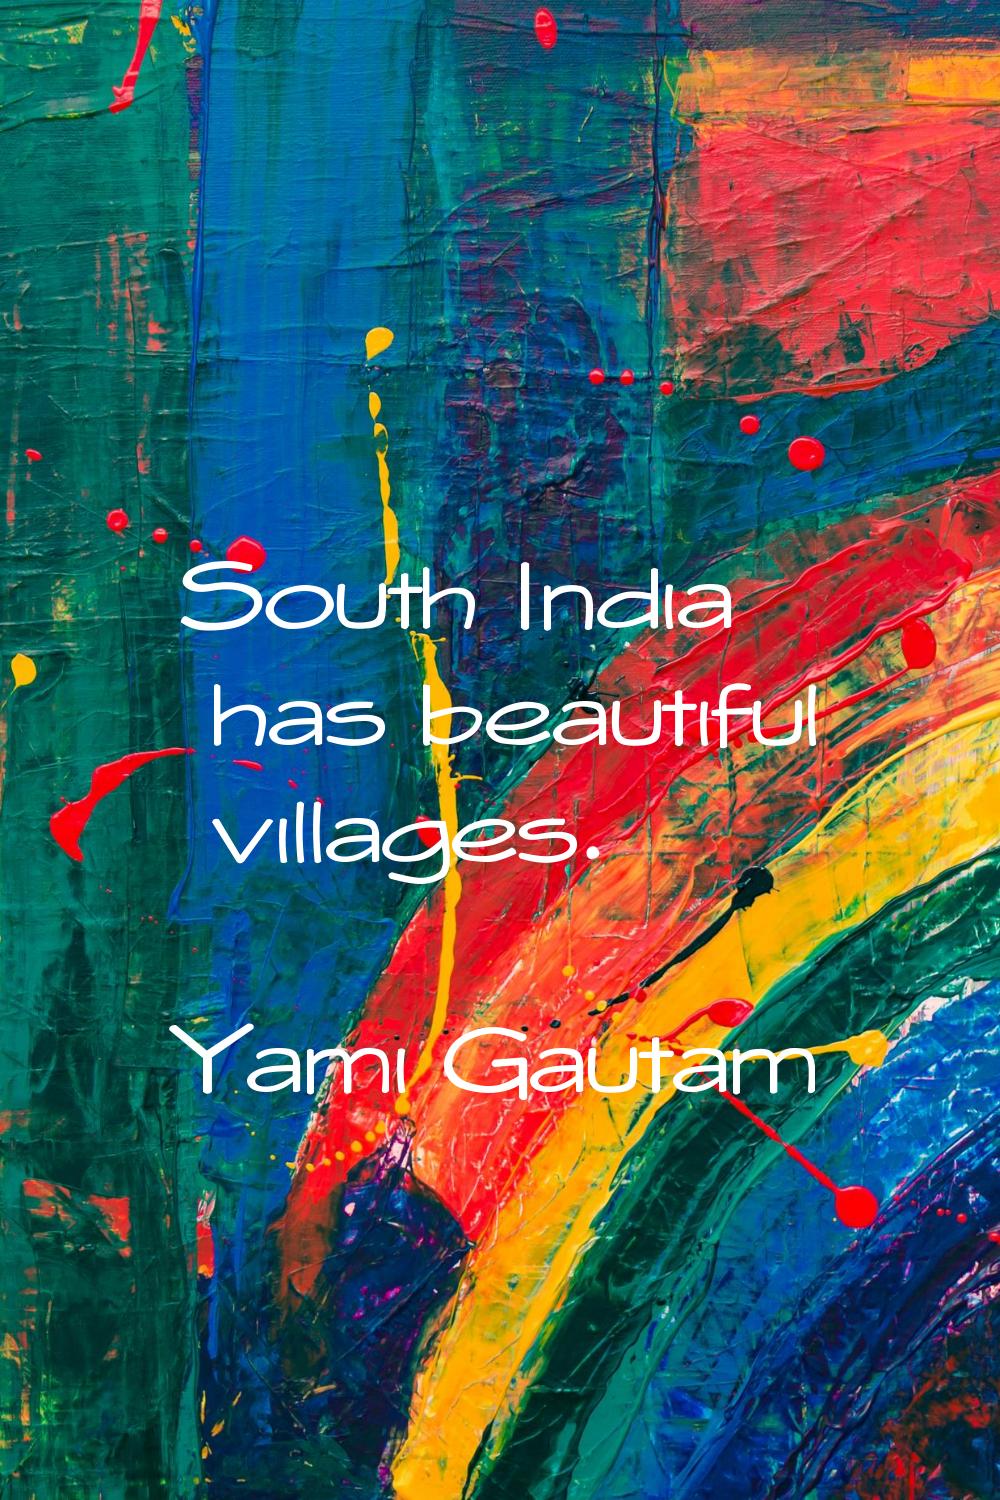 South India has beautiful villages.